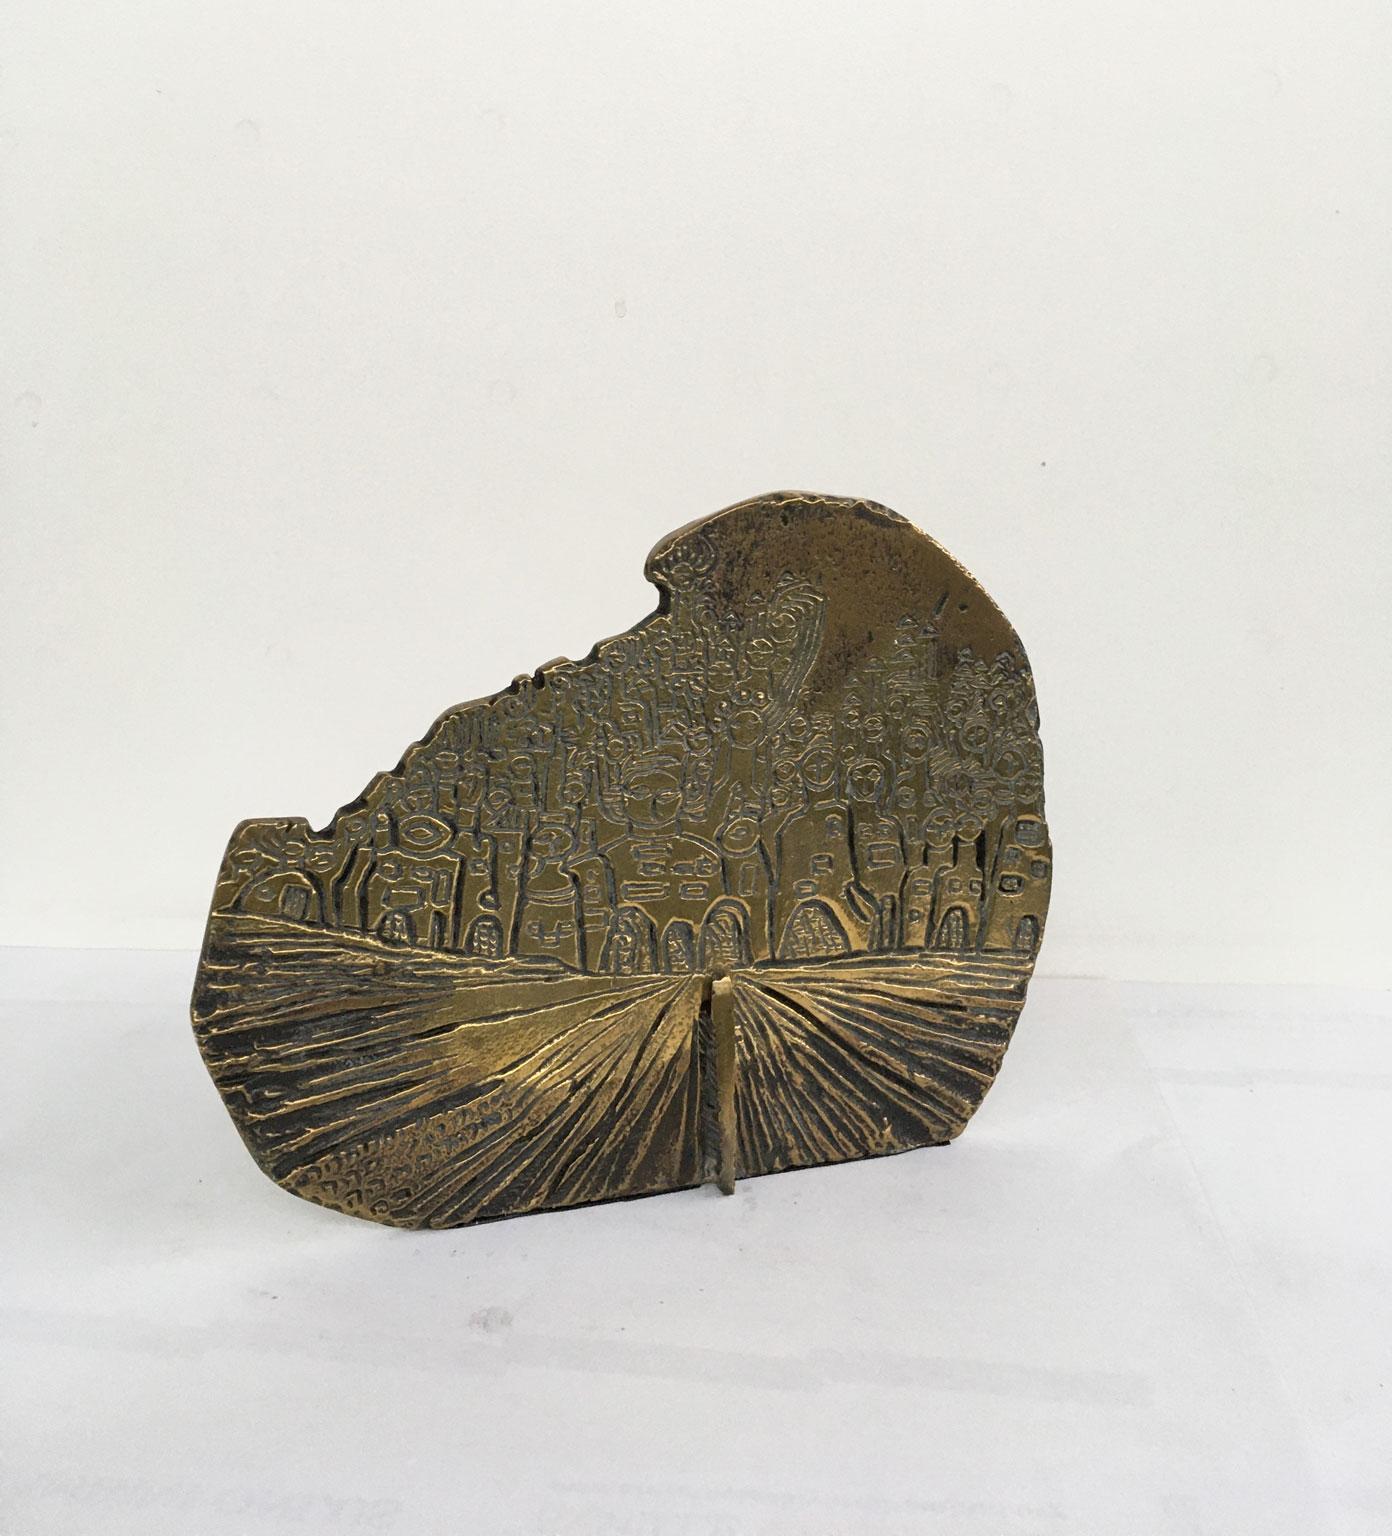 This engaging bronze abstract sculpture was created by the Italian artist Luciana Matalon in 1980.
This is a mulptiple of 1000 specimens numbered and signed. The title is 